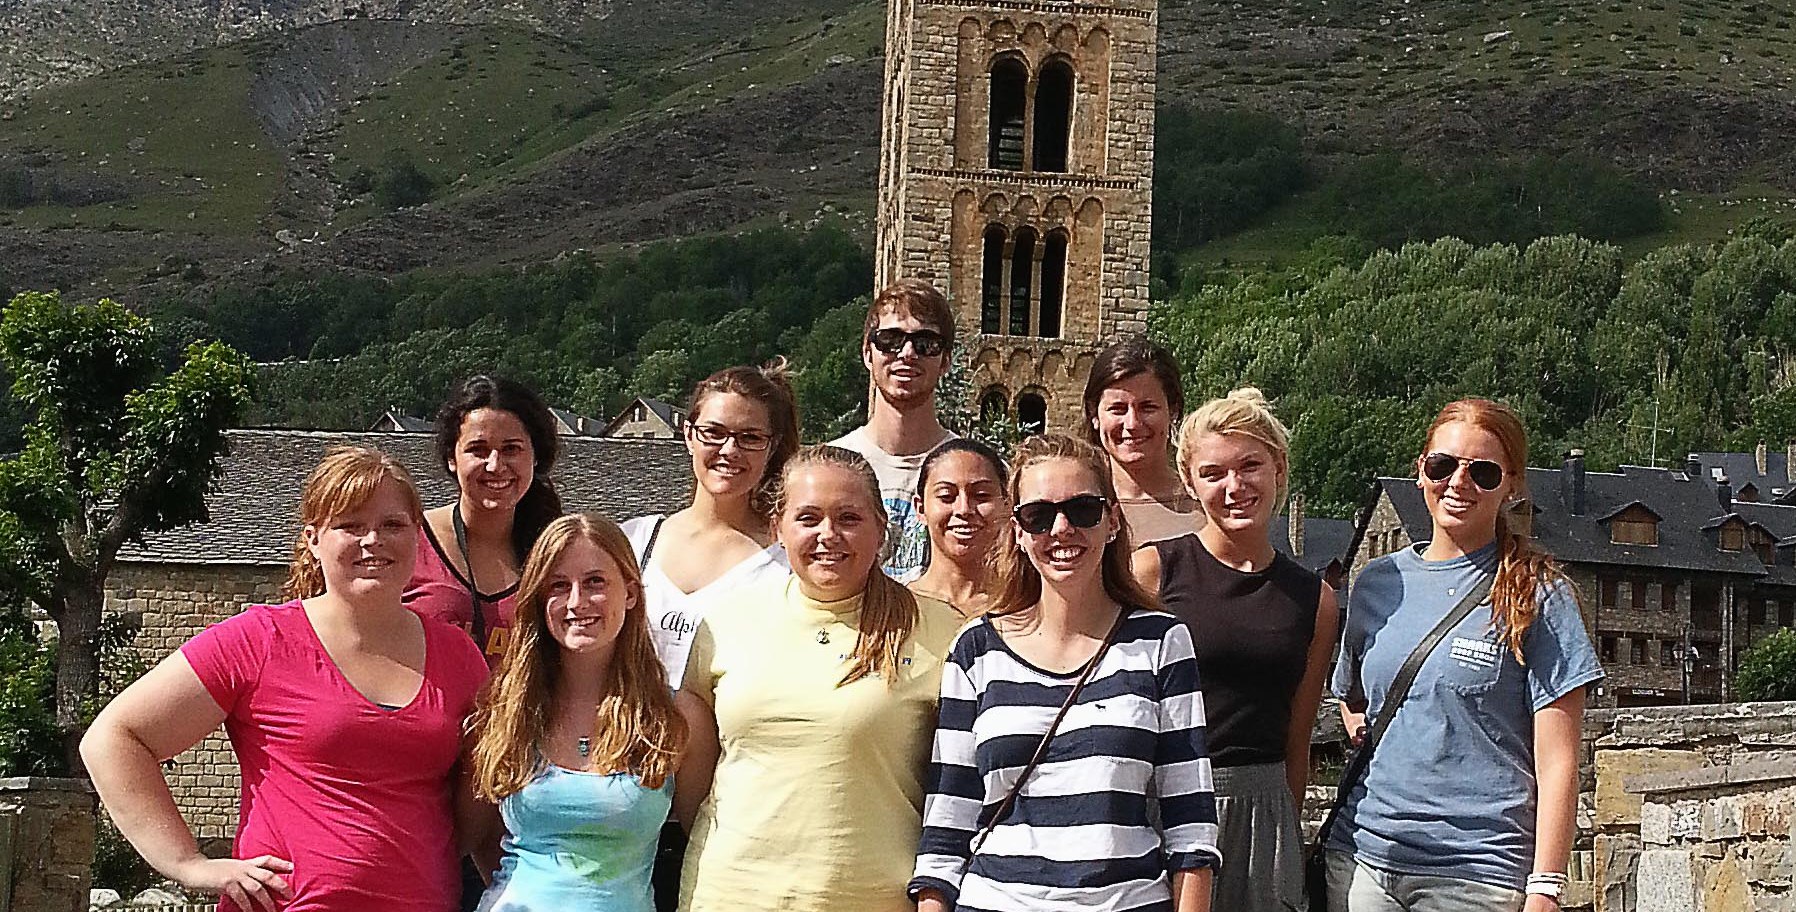 Photo of a group of KU students on a study abroad trip. There is a large brick building in the background surrounded by green hills.